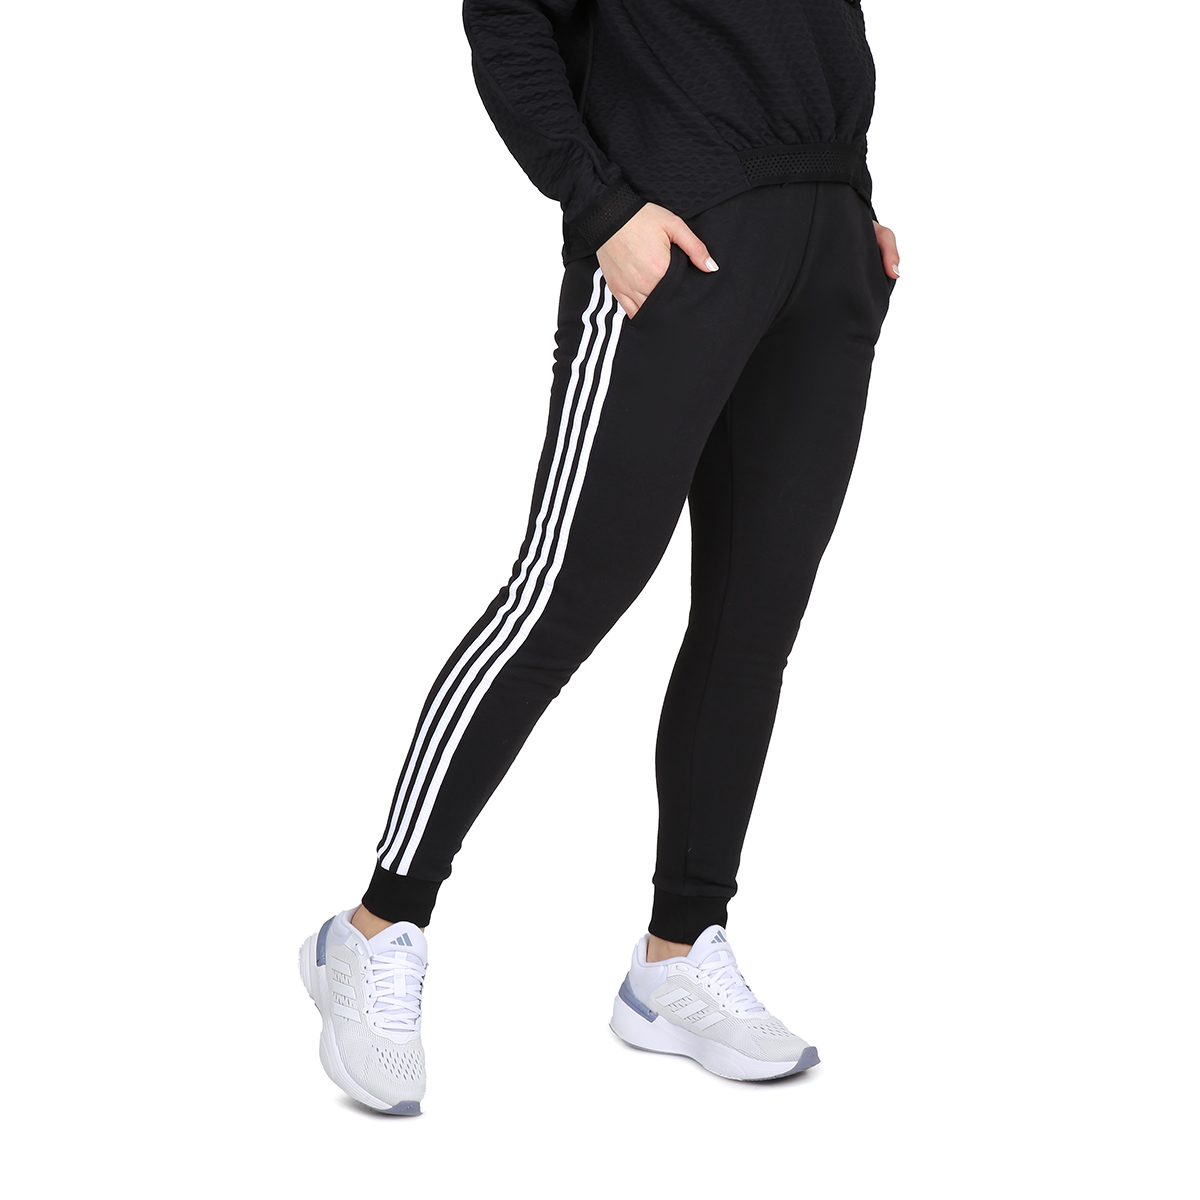 Pantalón Entrenamiento adidas Essentials 3 Stripes French Mujer,  image number null